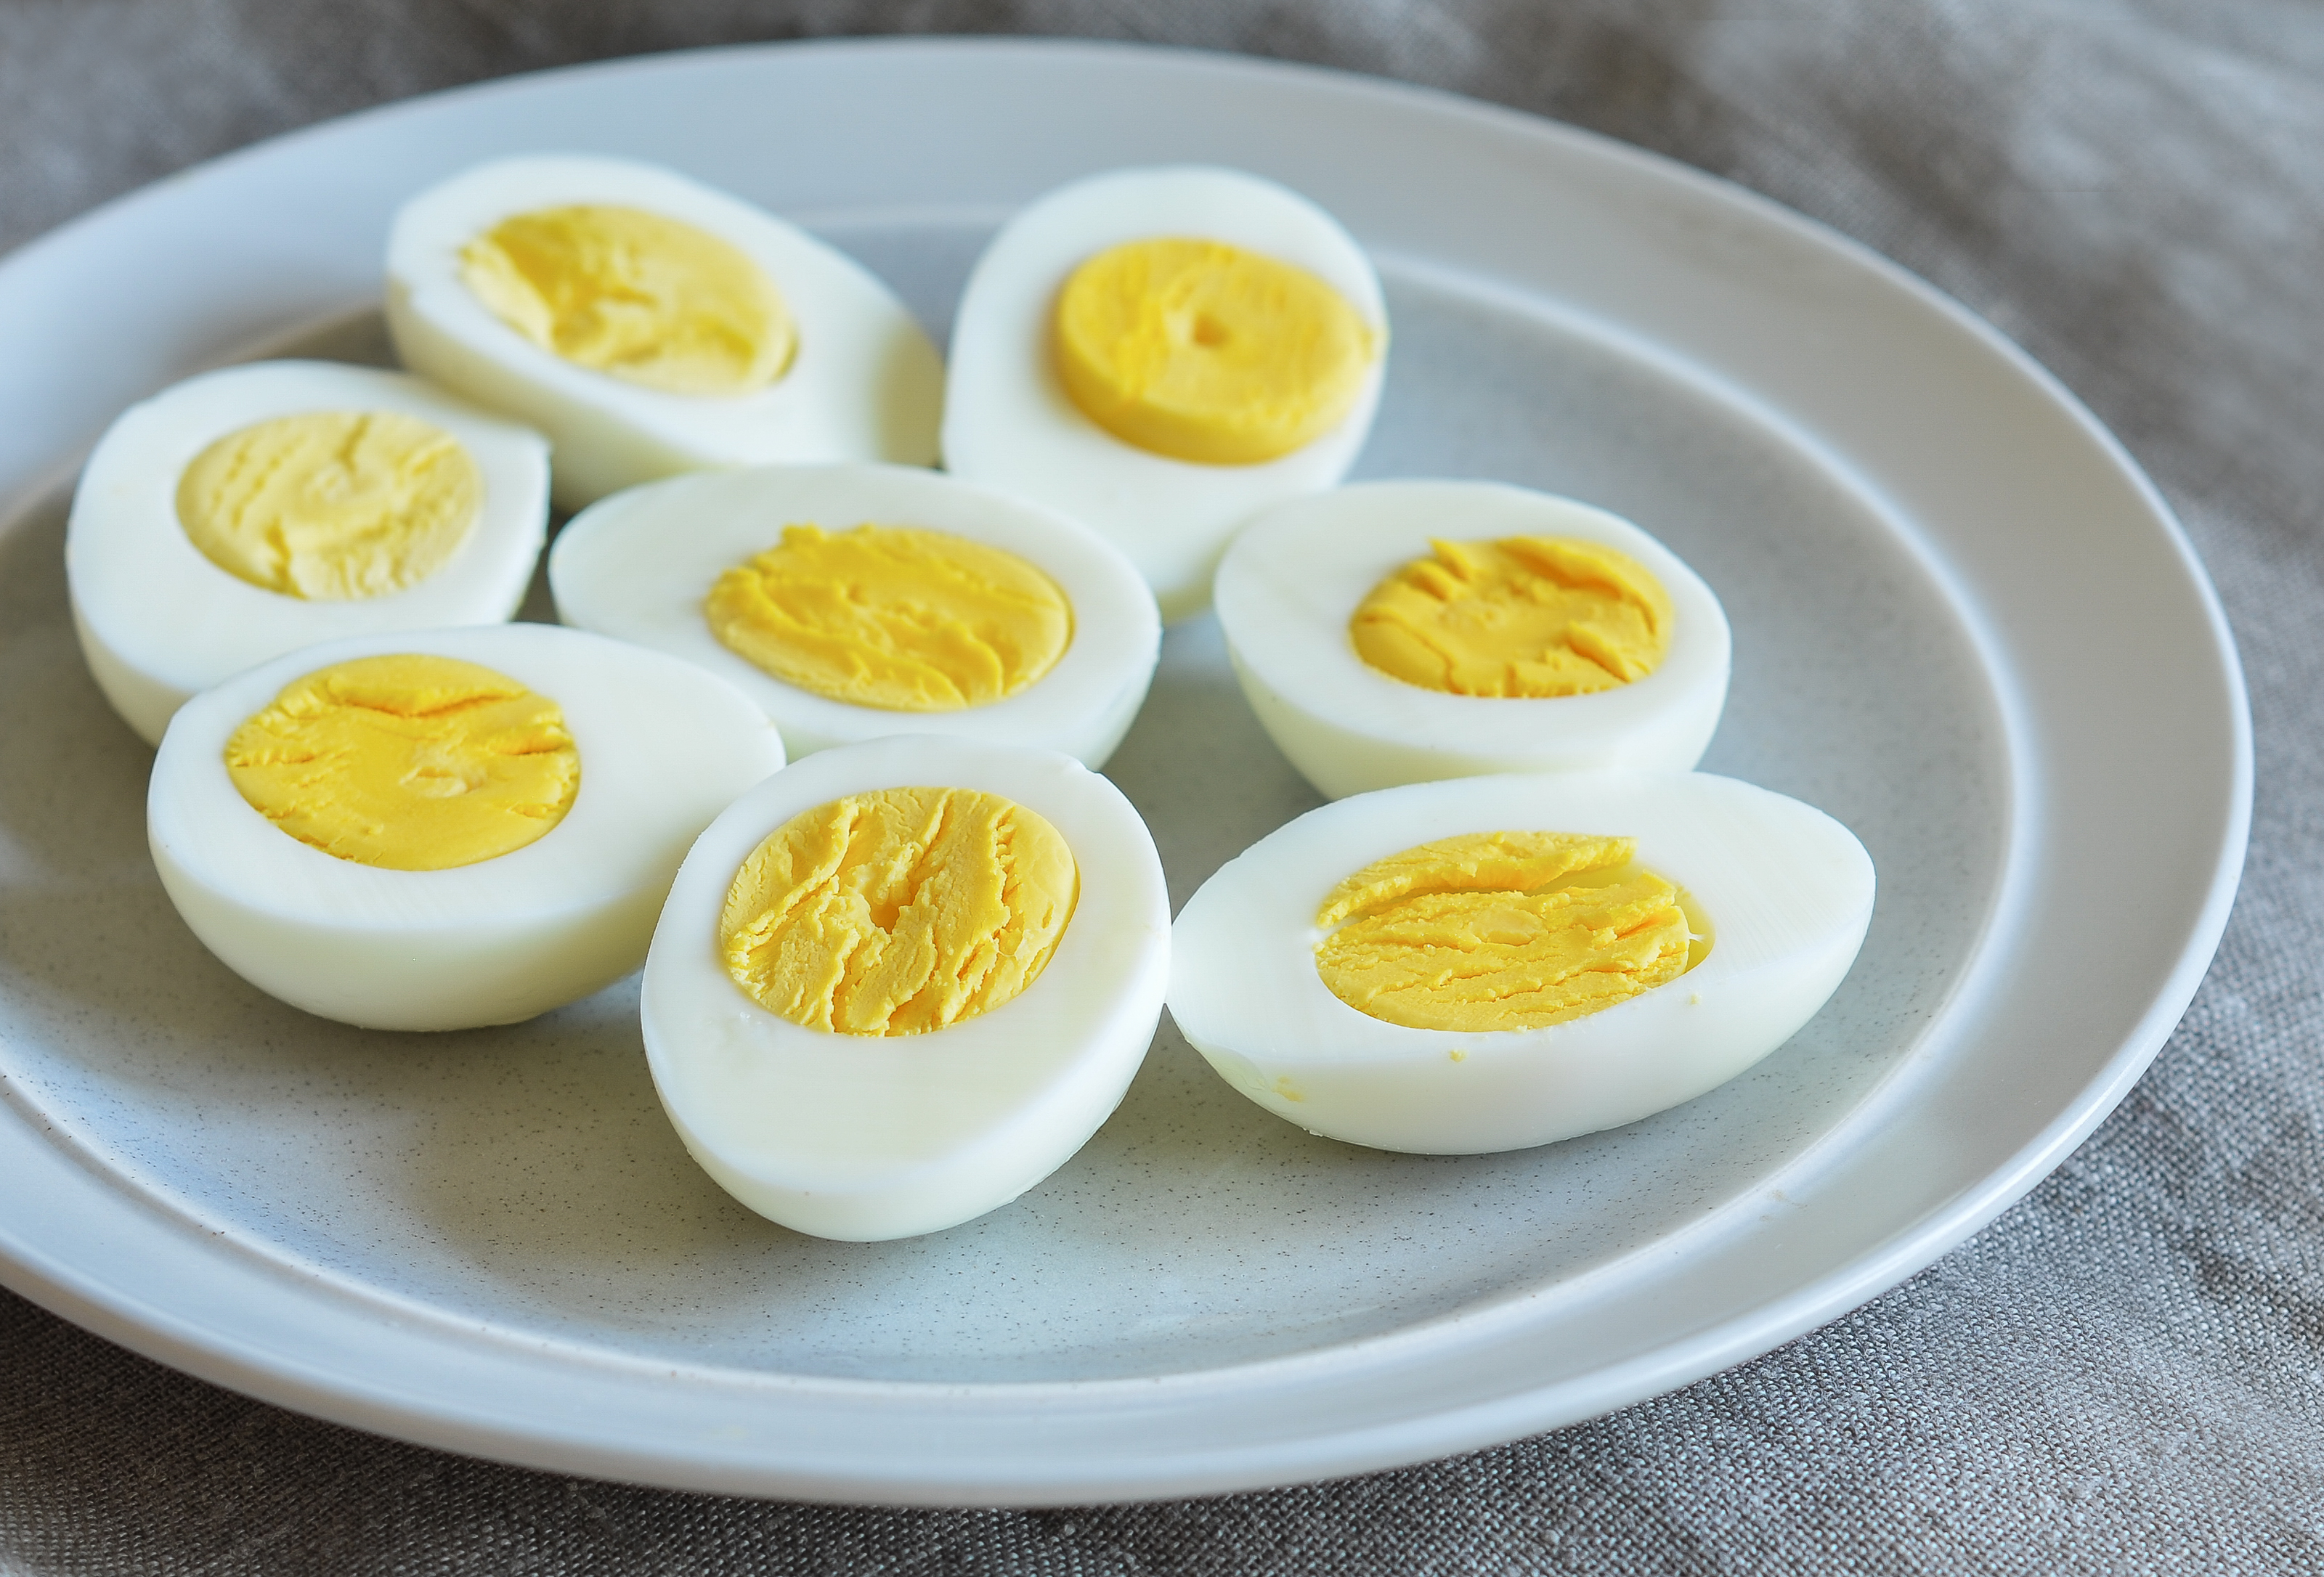 Several slice boiled eggs on a plate